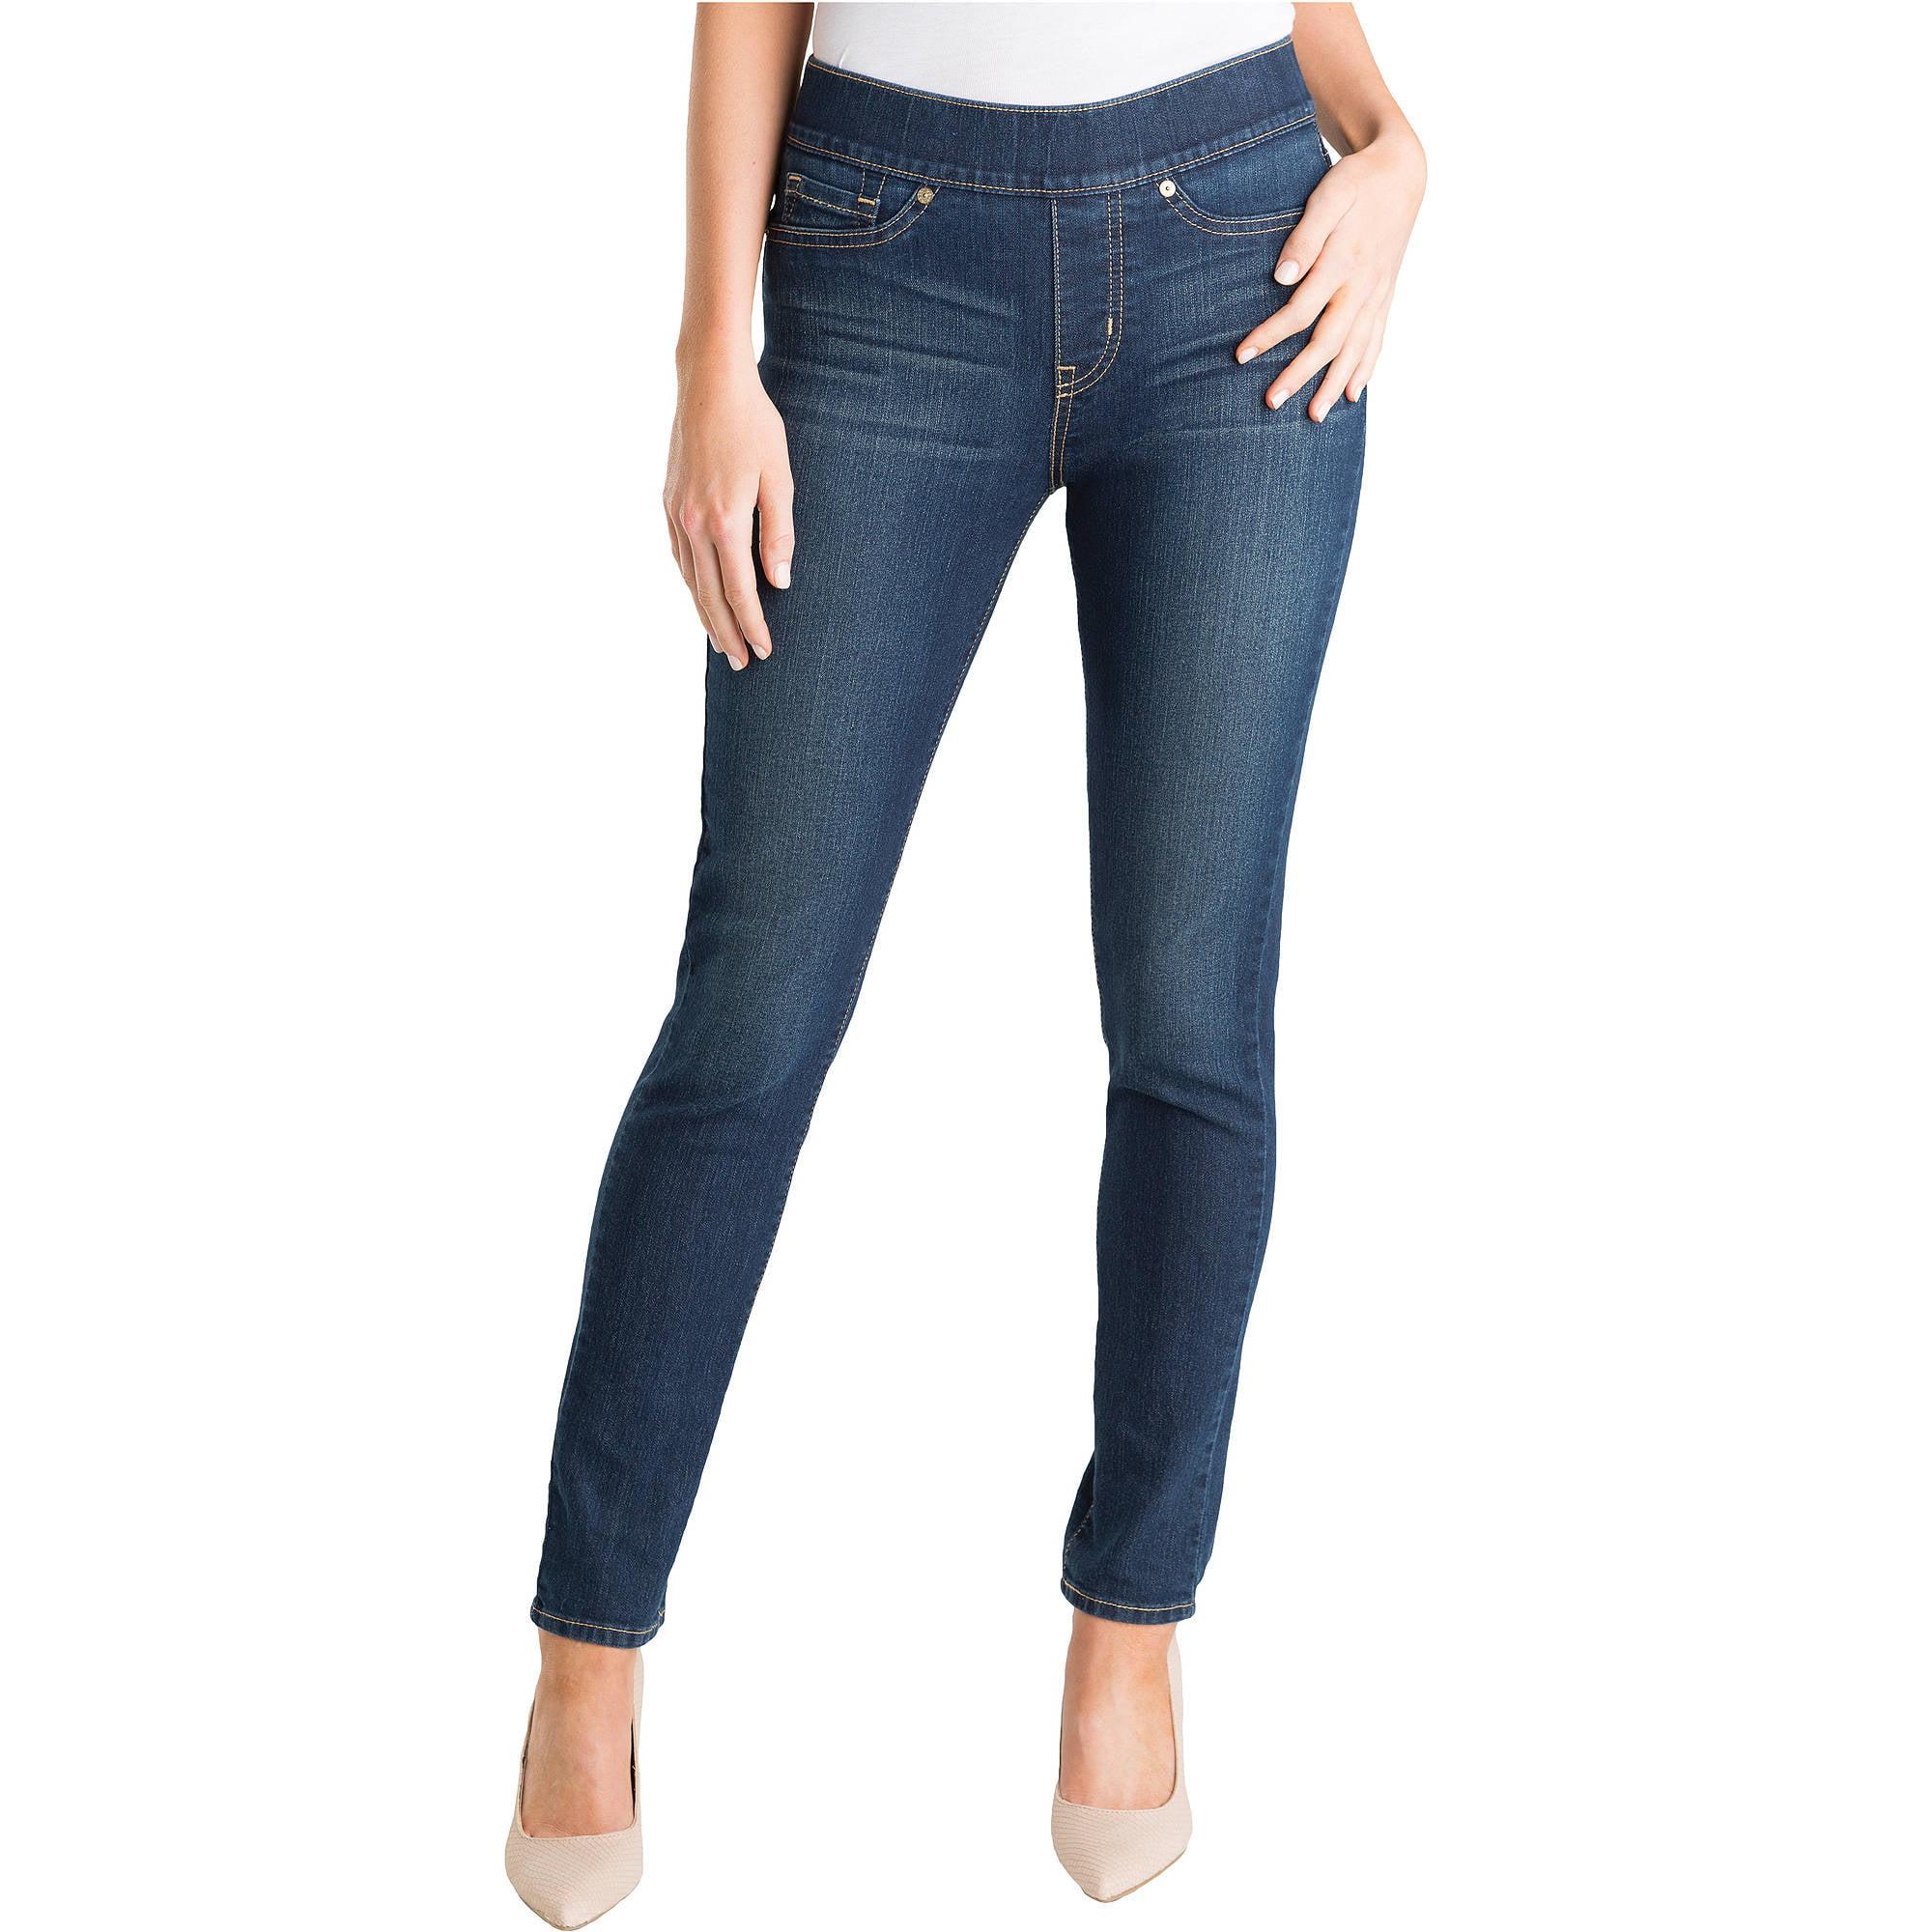 Women's Totally Shaping Pull On Skinny Jeans - Walmart.com